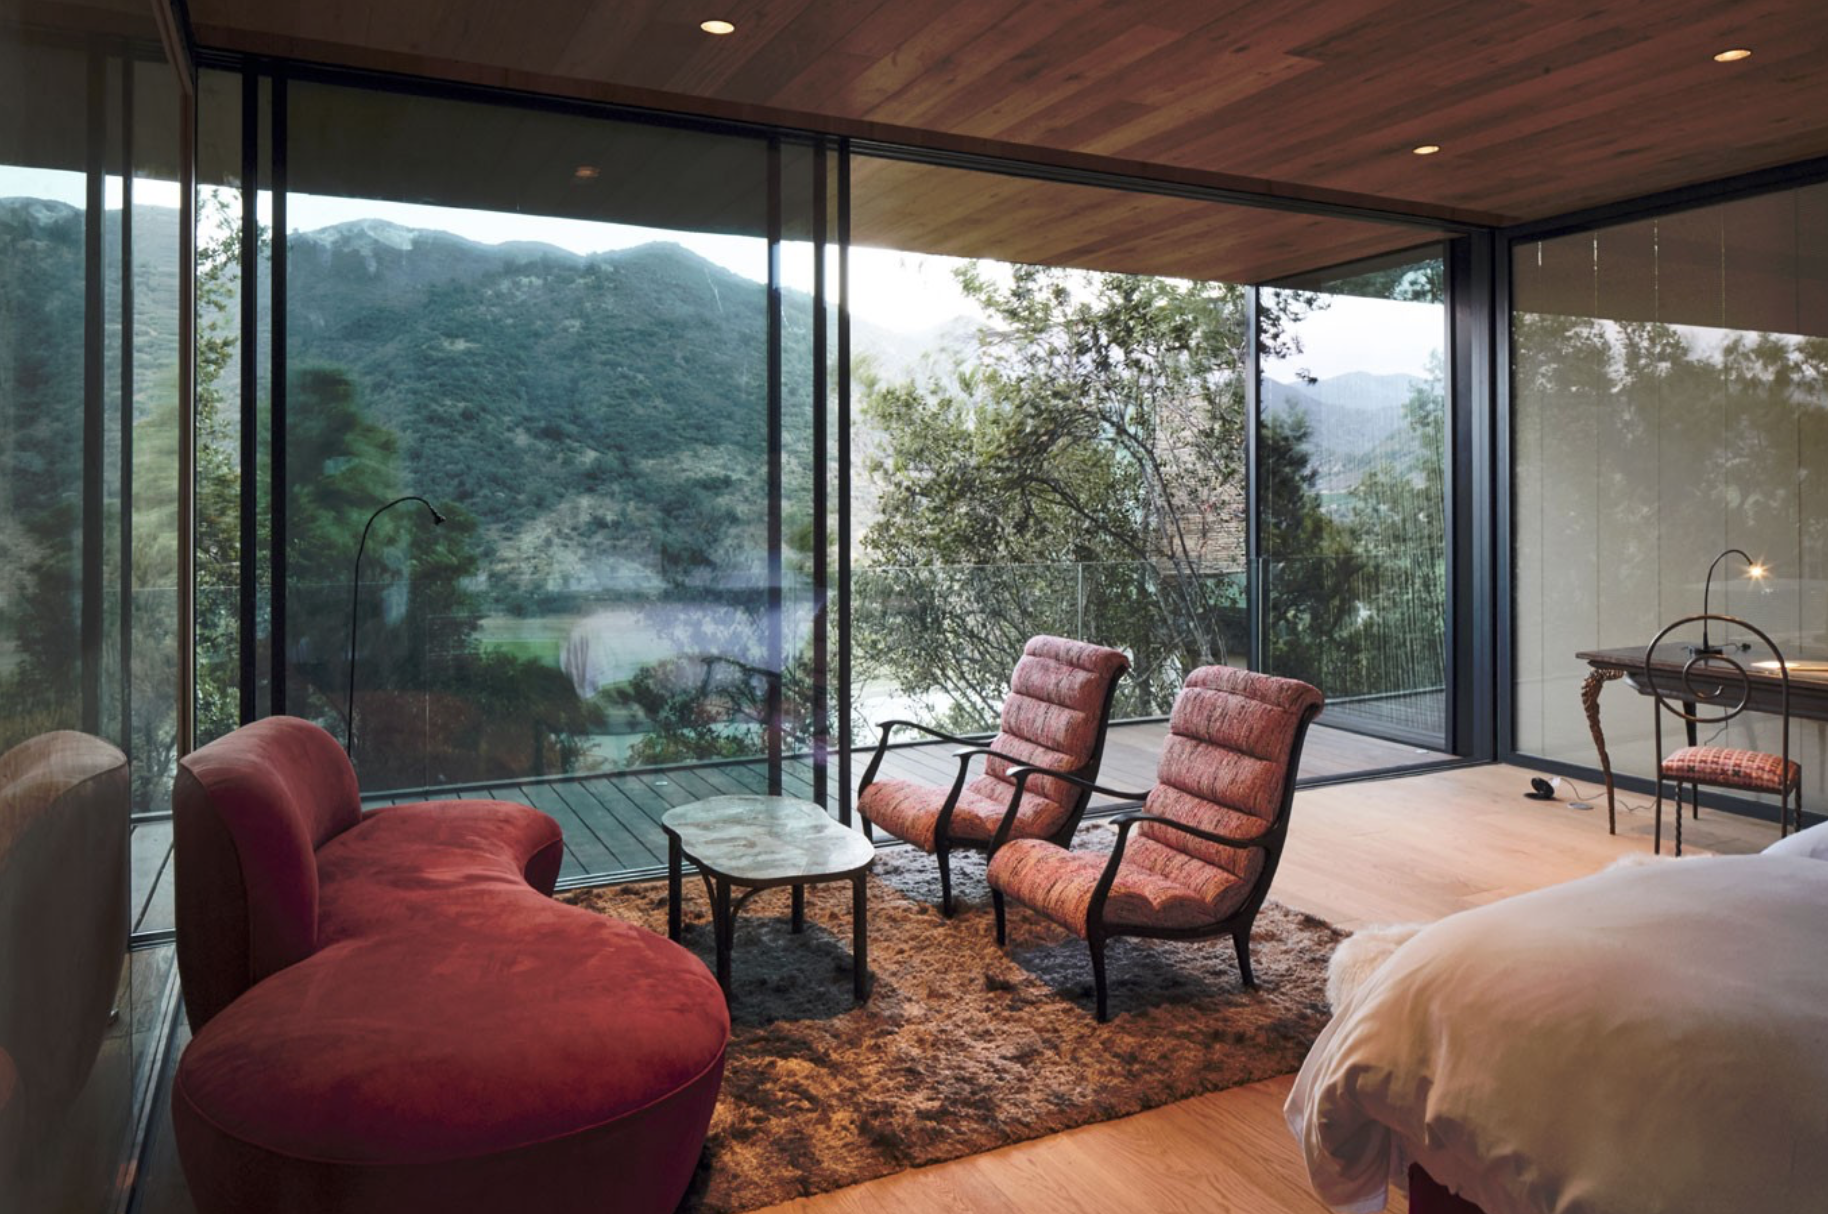 Shape of Women Suite at Puro Vik Retreat in Chile - Glass-walled houses on cliffs overlooking the Millahue Valley